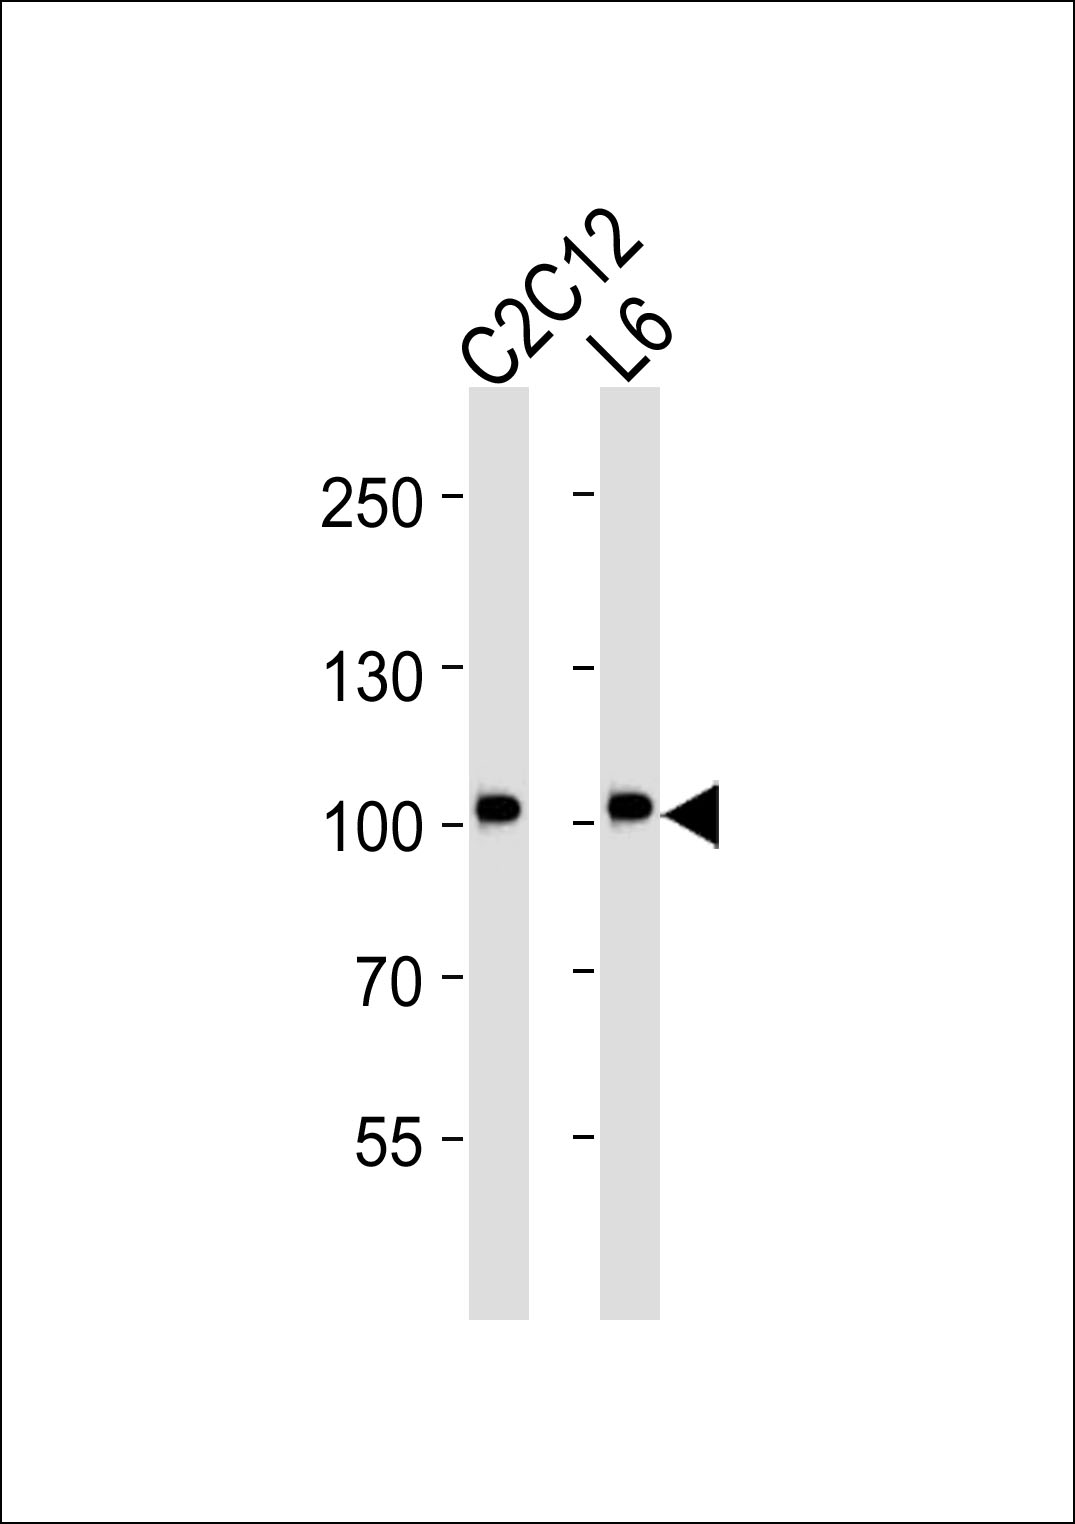 Western blot analysis of lysates from C2C12, L6 cell line (from left to right), using Musk Antibody(Cat.  #AM8443b). AM8443b was diluted at 1:2000 at each lane. A goat anti-mouse IgG H&L(HRP) at 1:3000 dilution was used as the secondary antibody. Lysates at 20?g per lane.